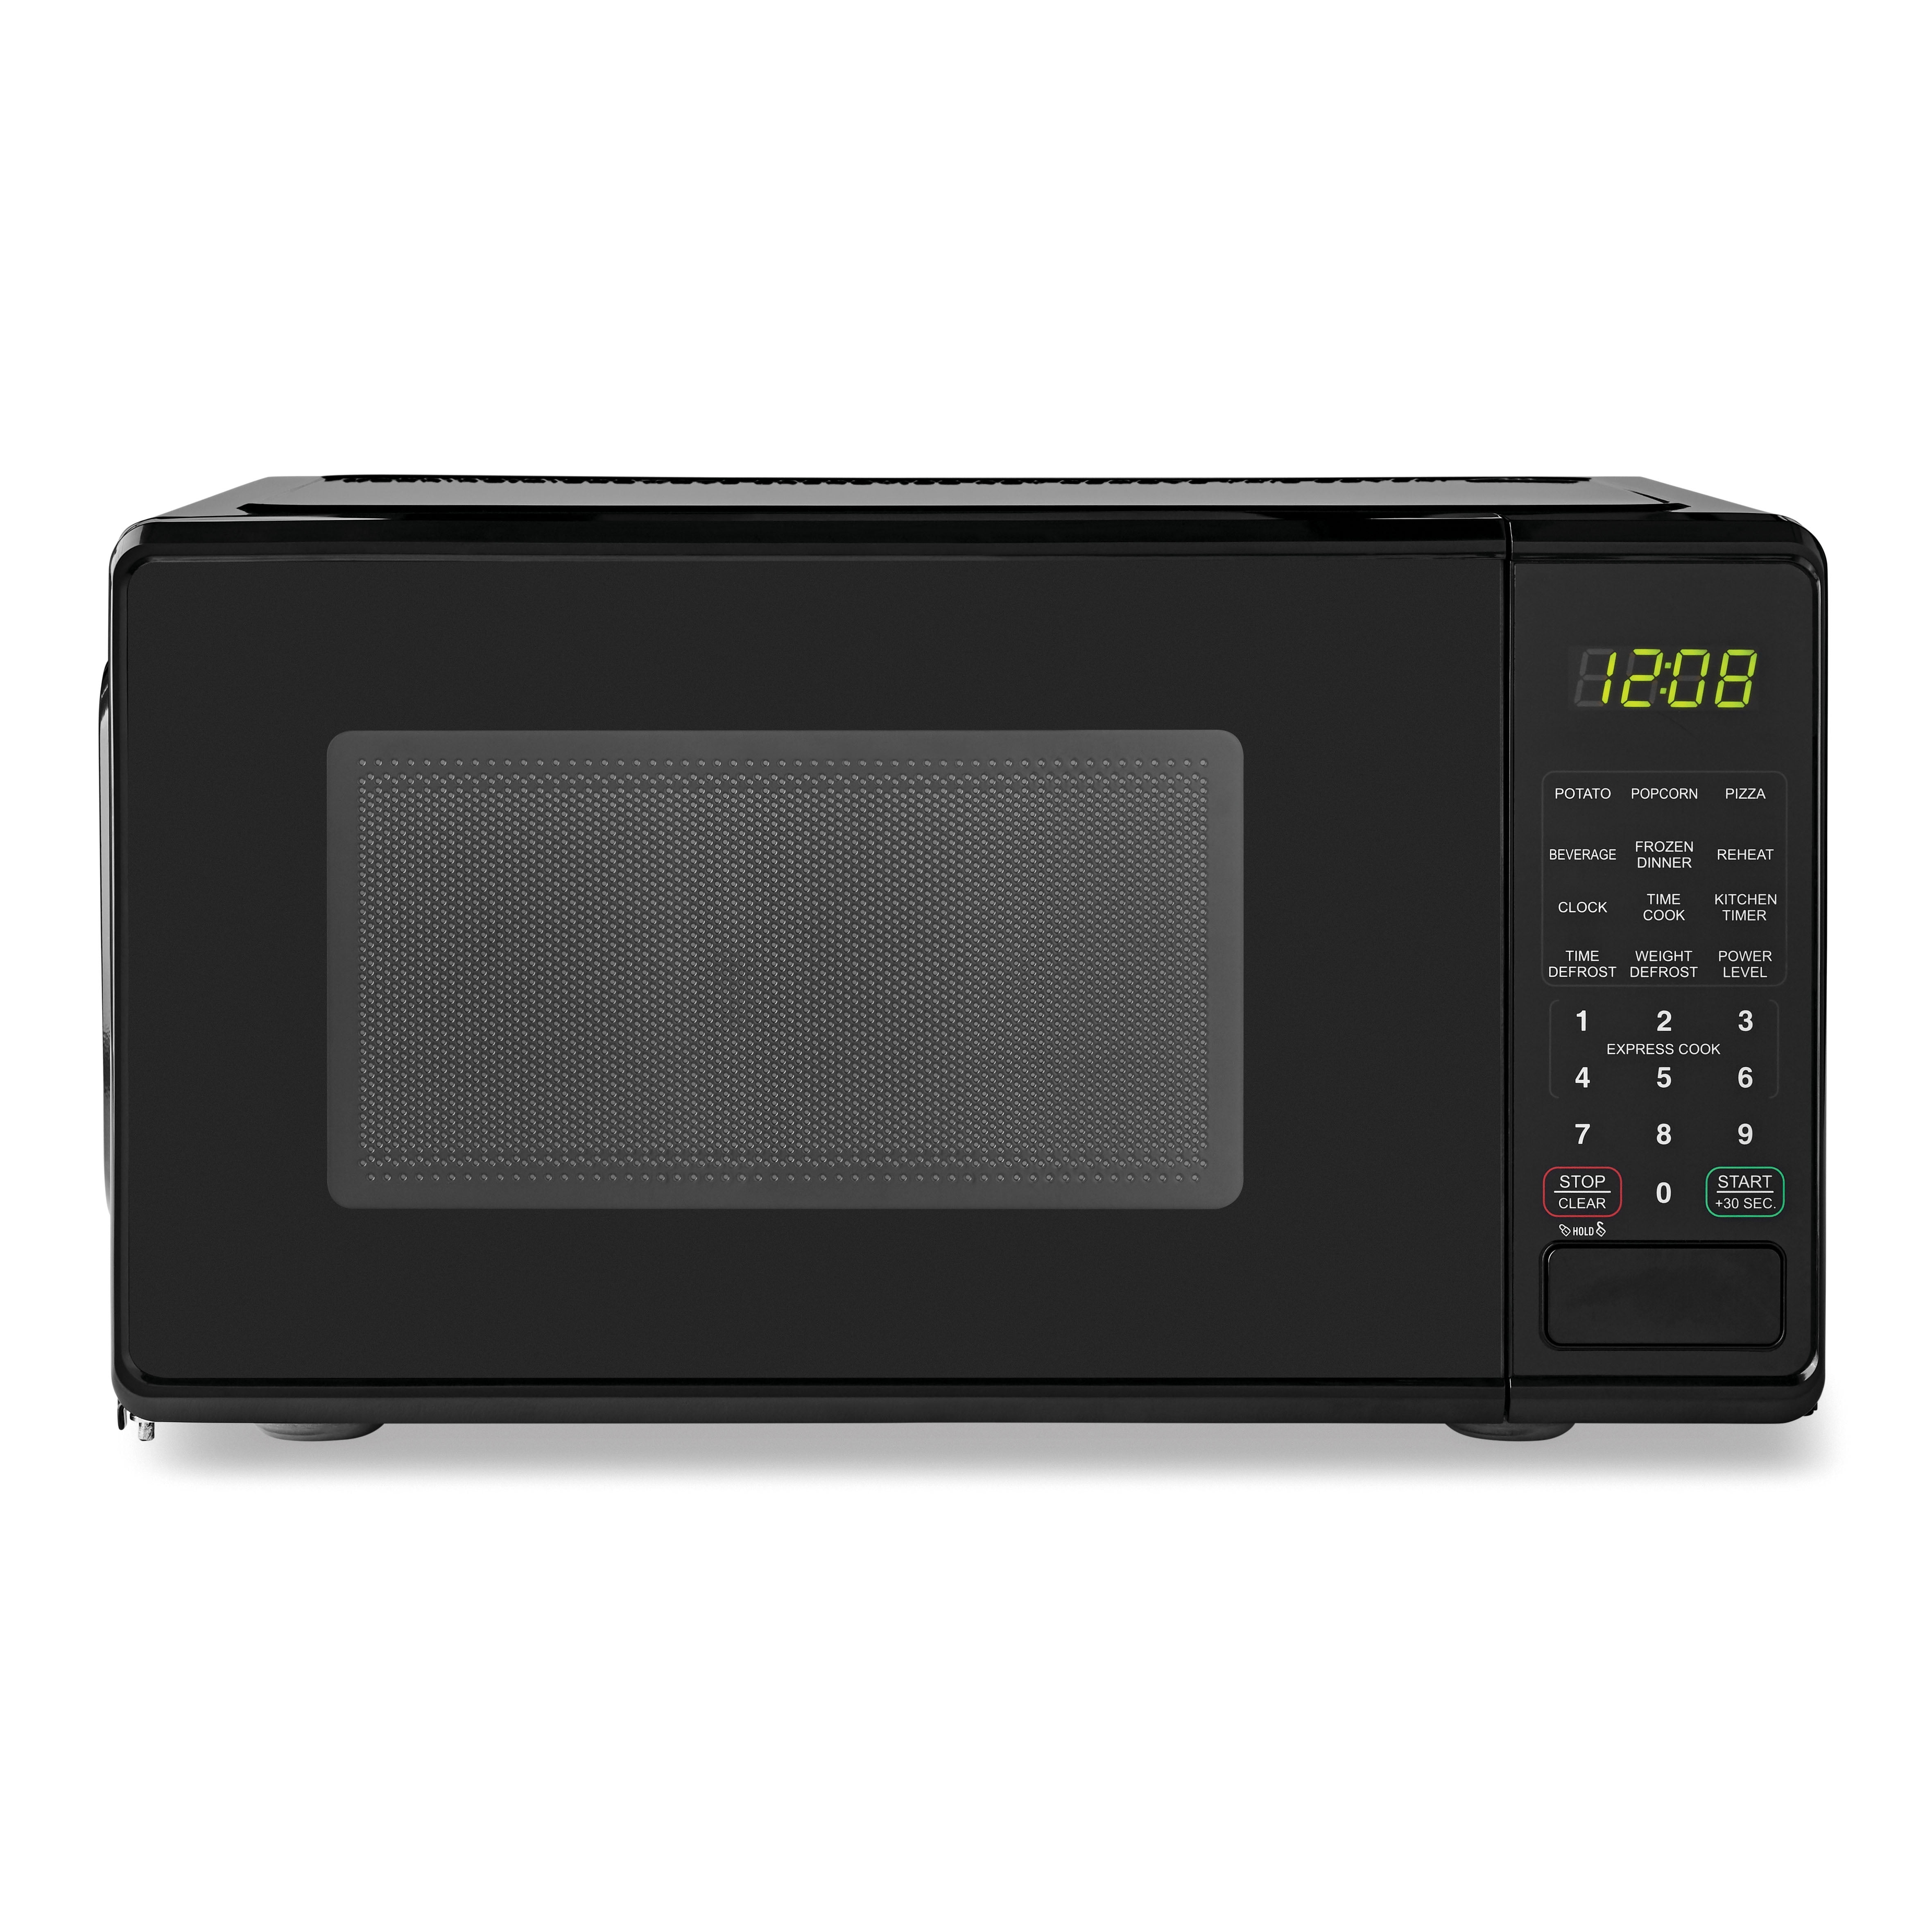 Mainstays 0.7 Cu ft Compact Countertop Microwave Oven, Black